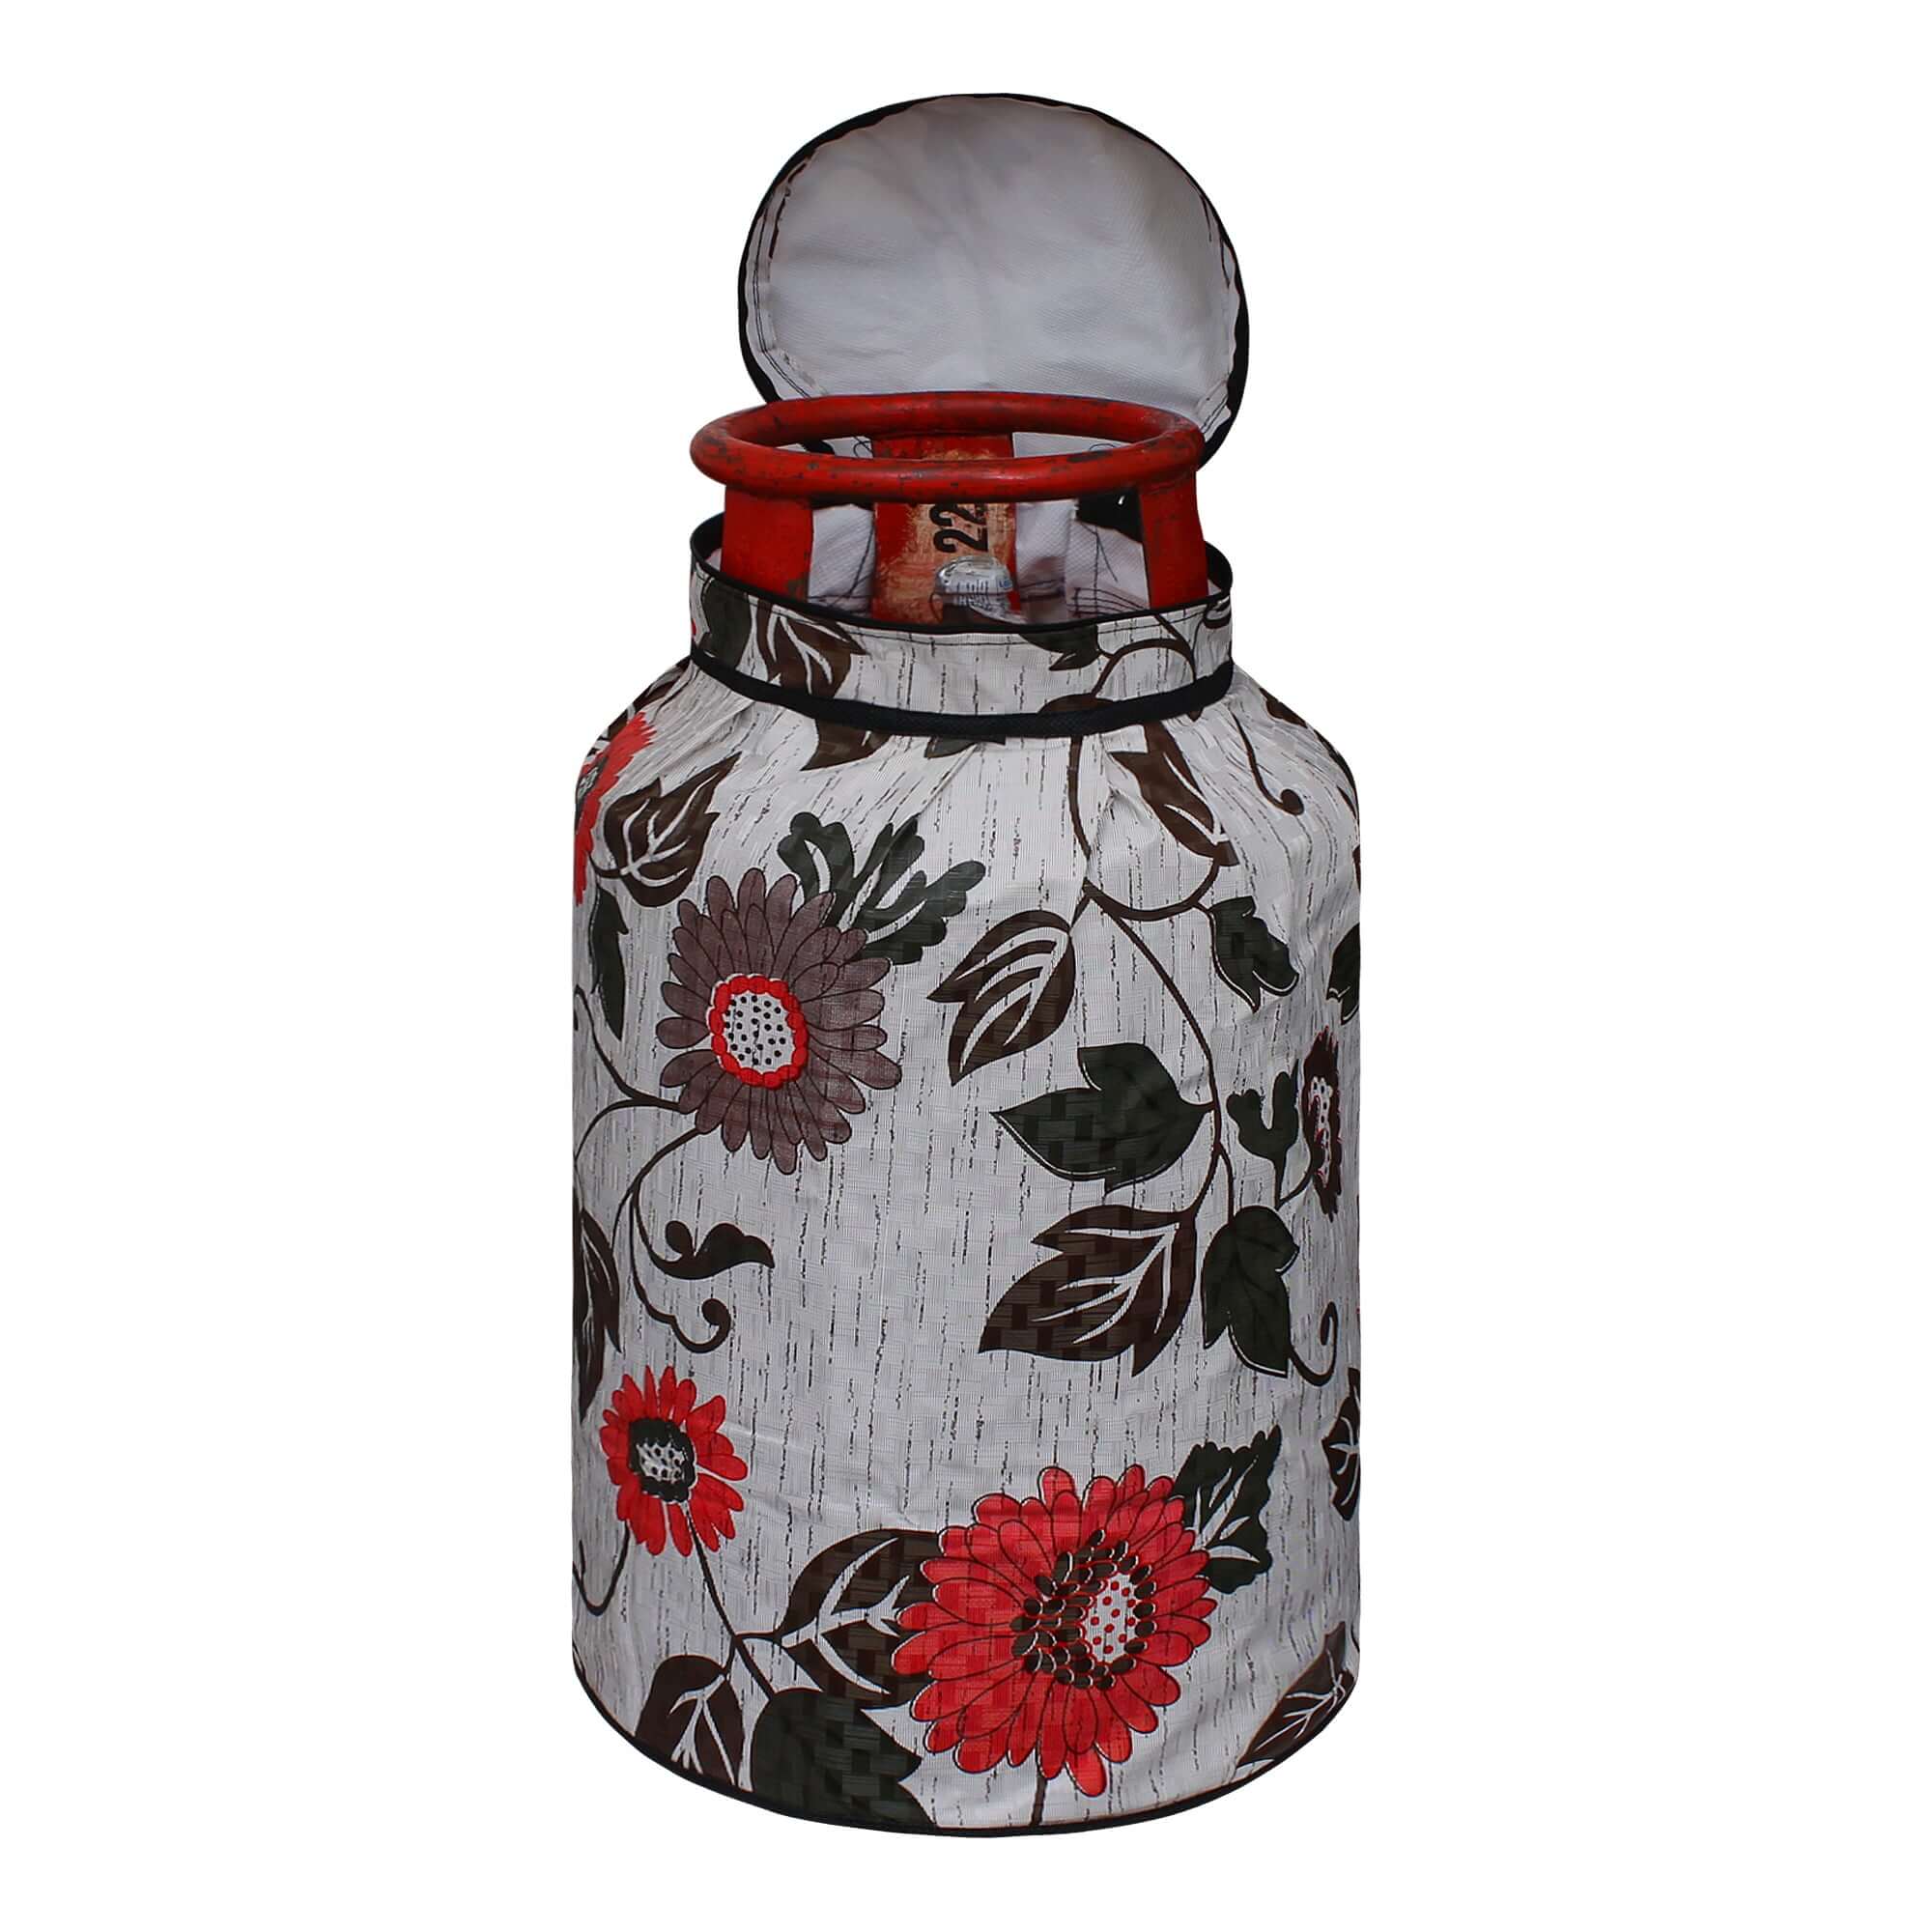 LPG Gas Cylinder Cover, SA21 - Dream Care Furnishings Private Limited